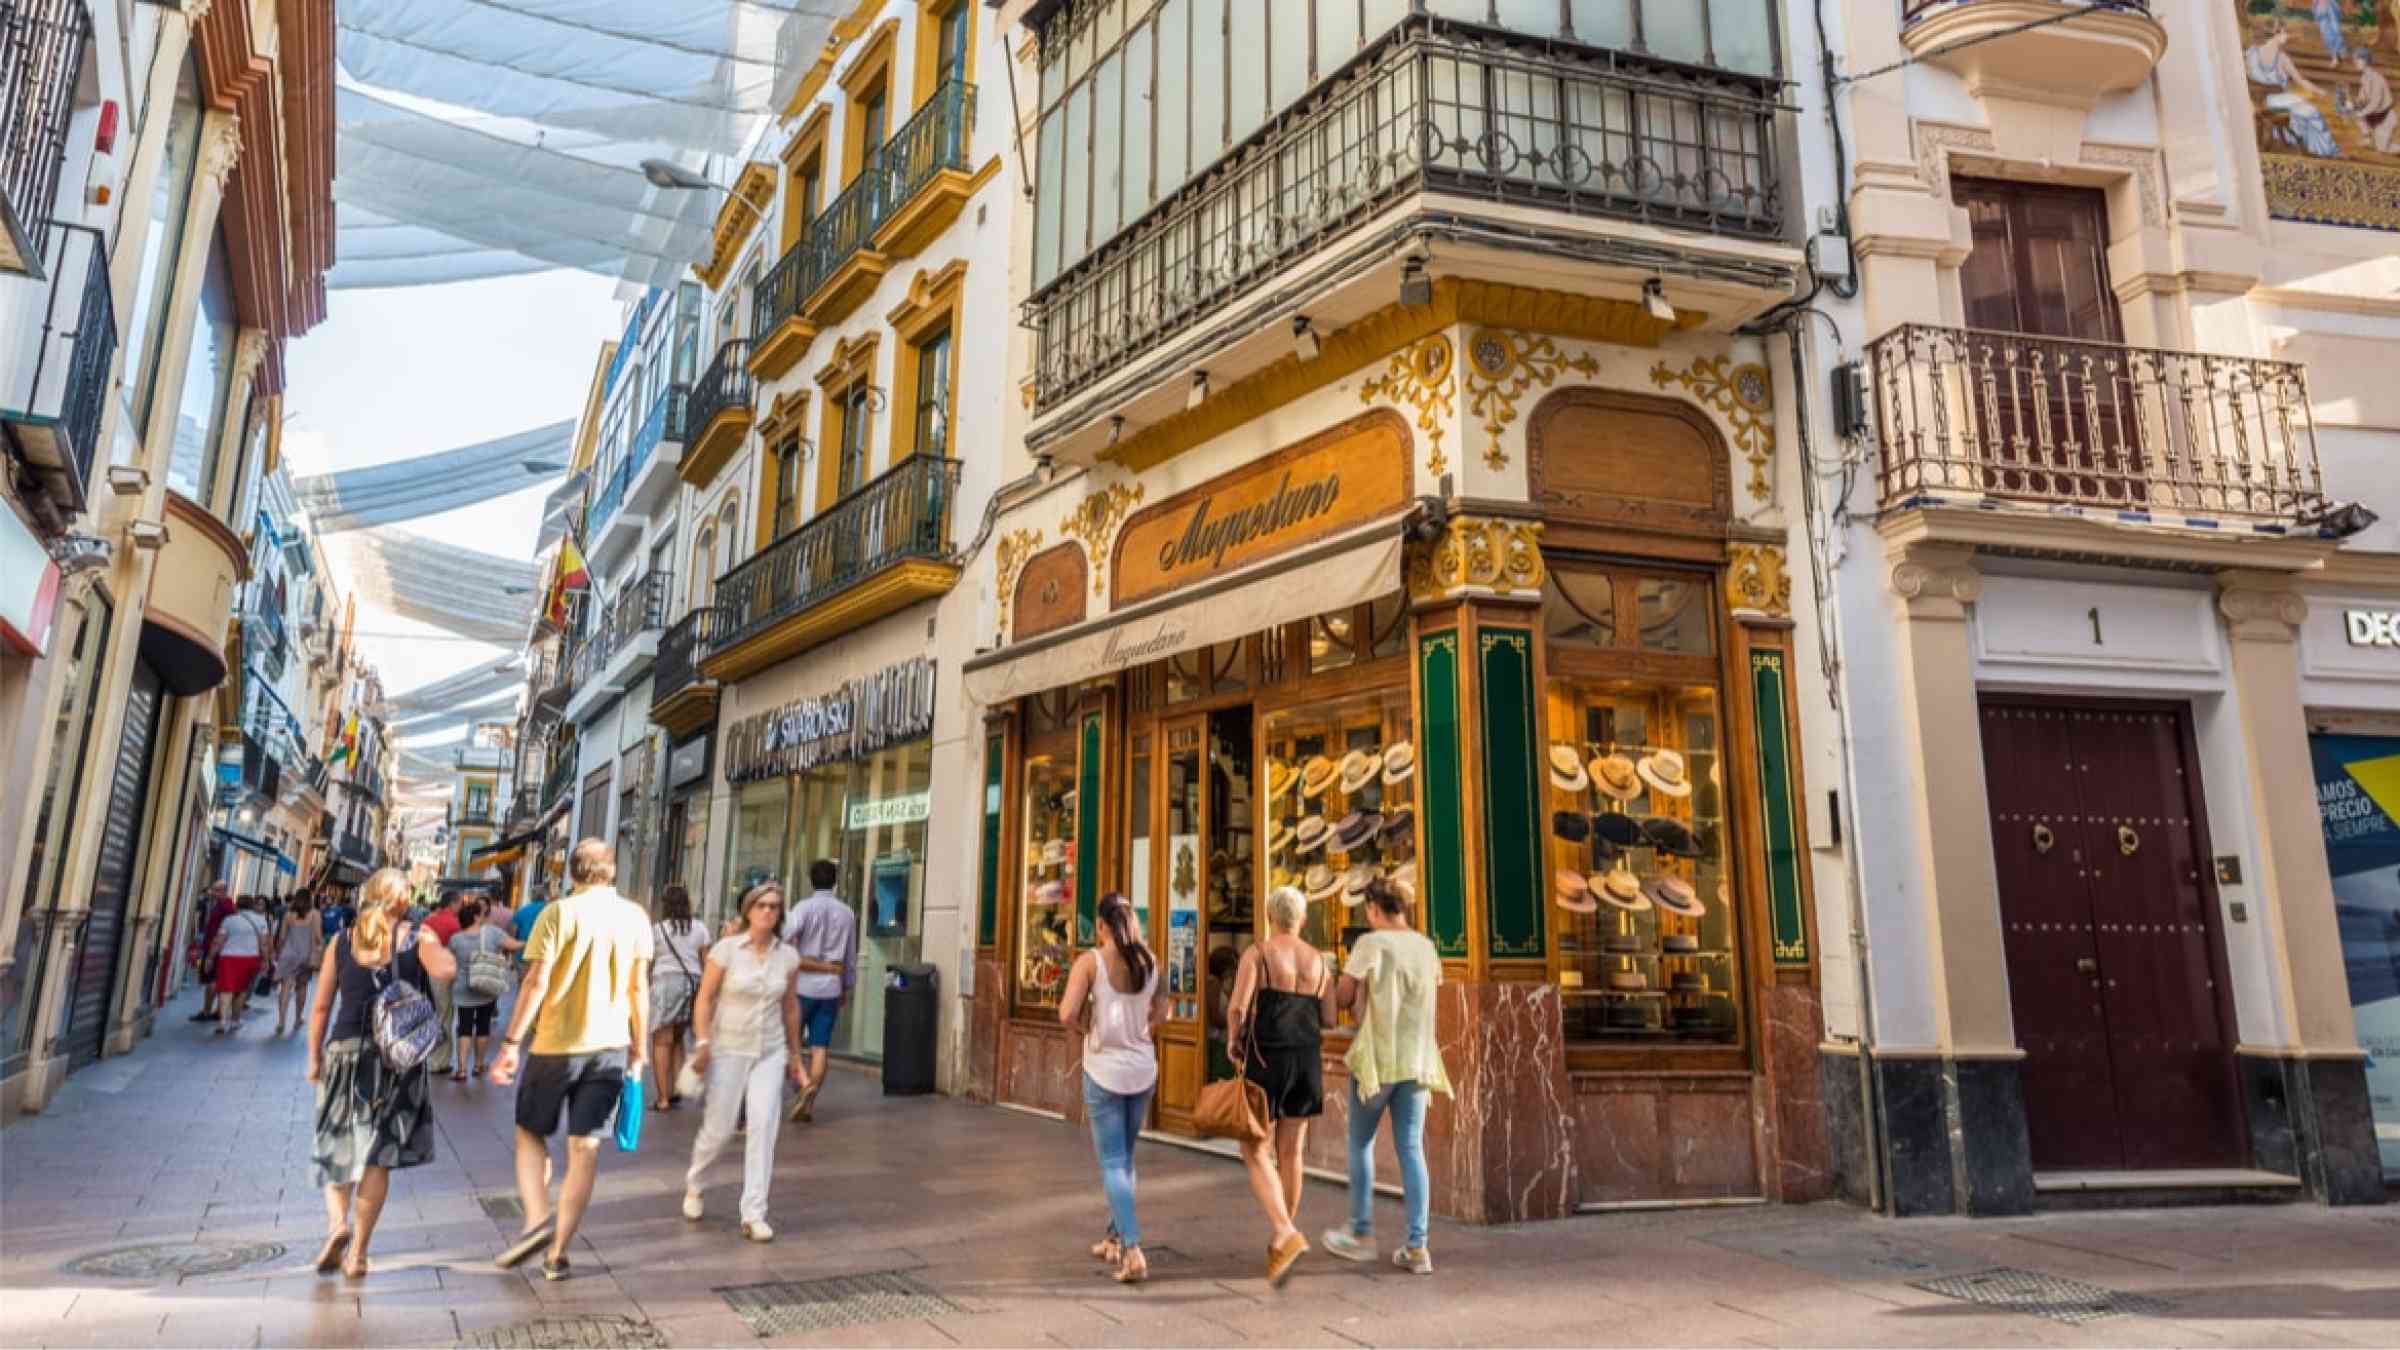 Traditional and busy shopping street in Seville, Spain (2017)